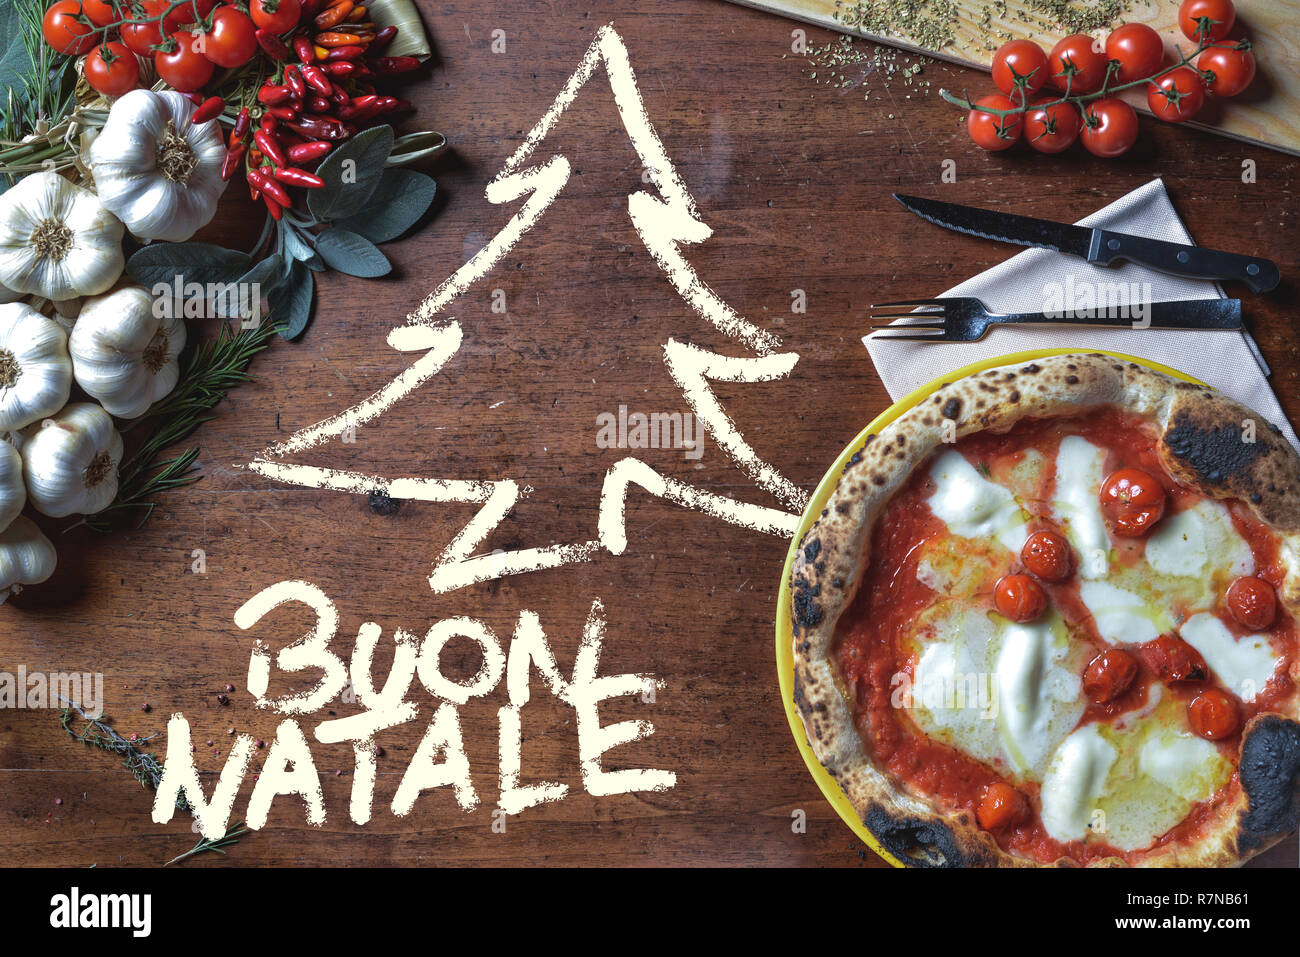 Buon Natale Kitchen Towel.Napolitan Pizza High Resolution Stock Photography And Images Alamy